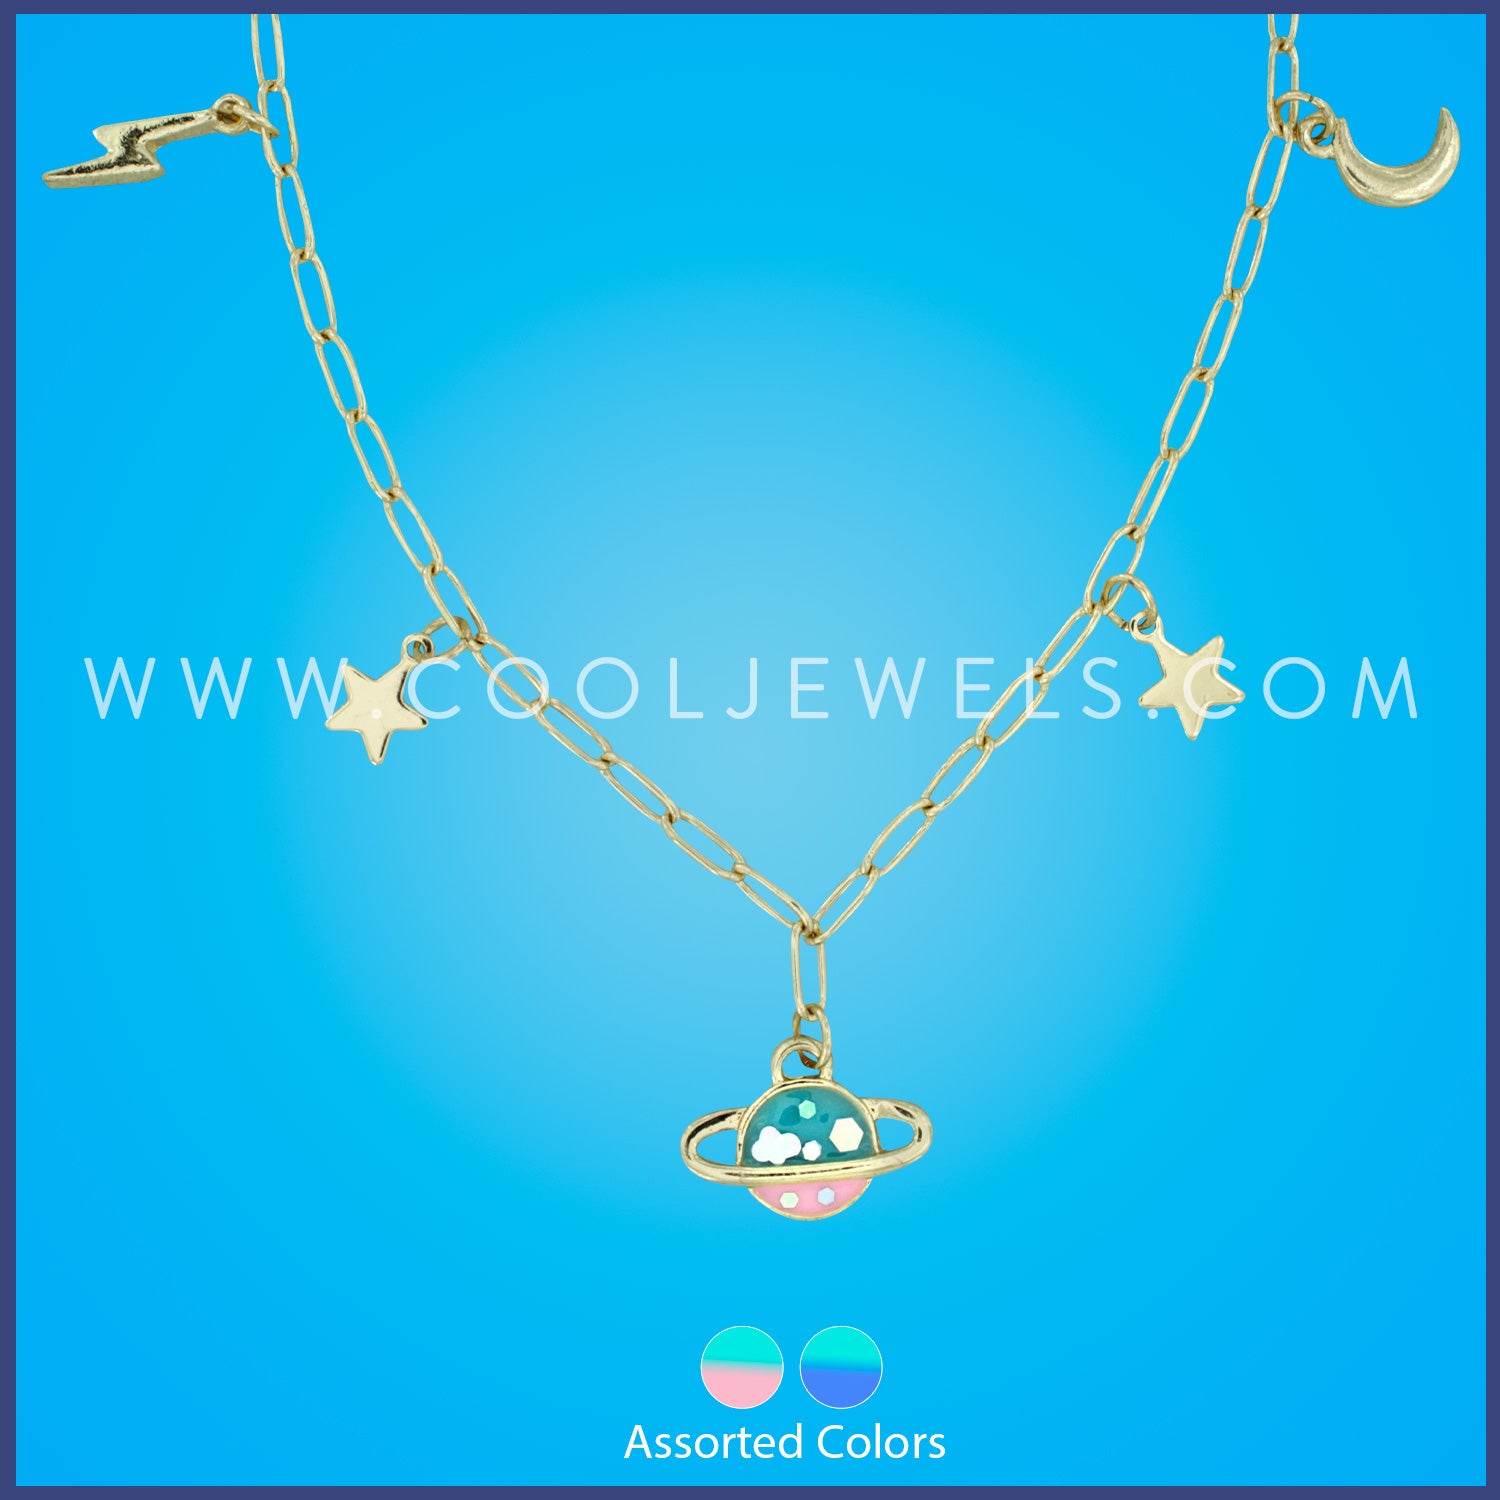 GOLD LINK CHAIN NECKLACE WITH COLORED SATURN PENDANT & GOLD STARS - ASSOTED